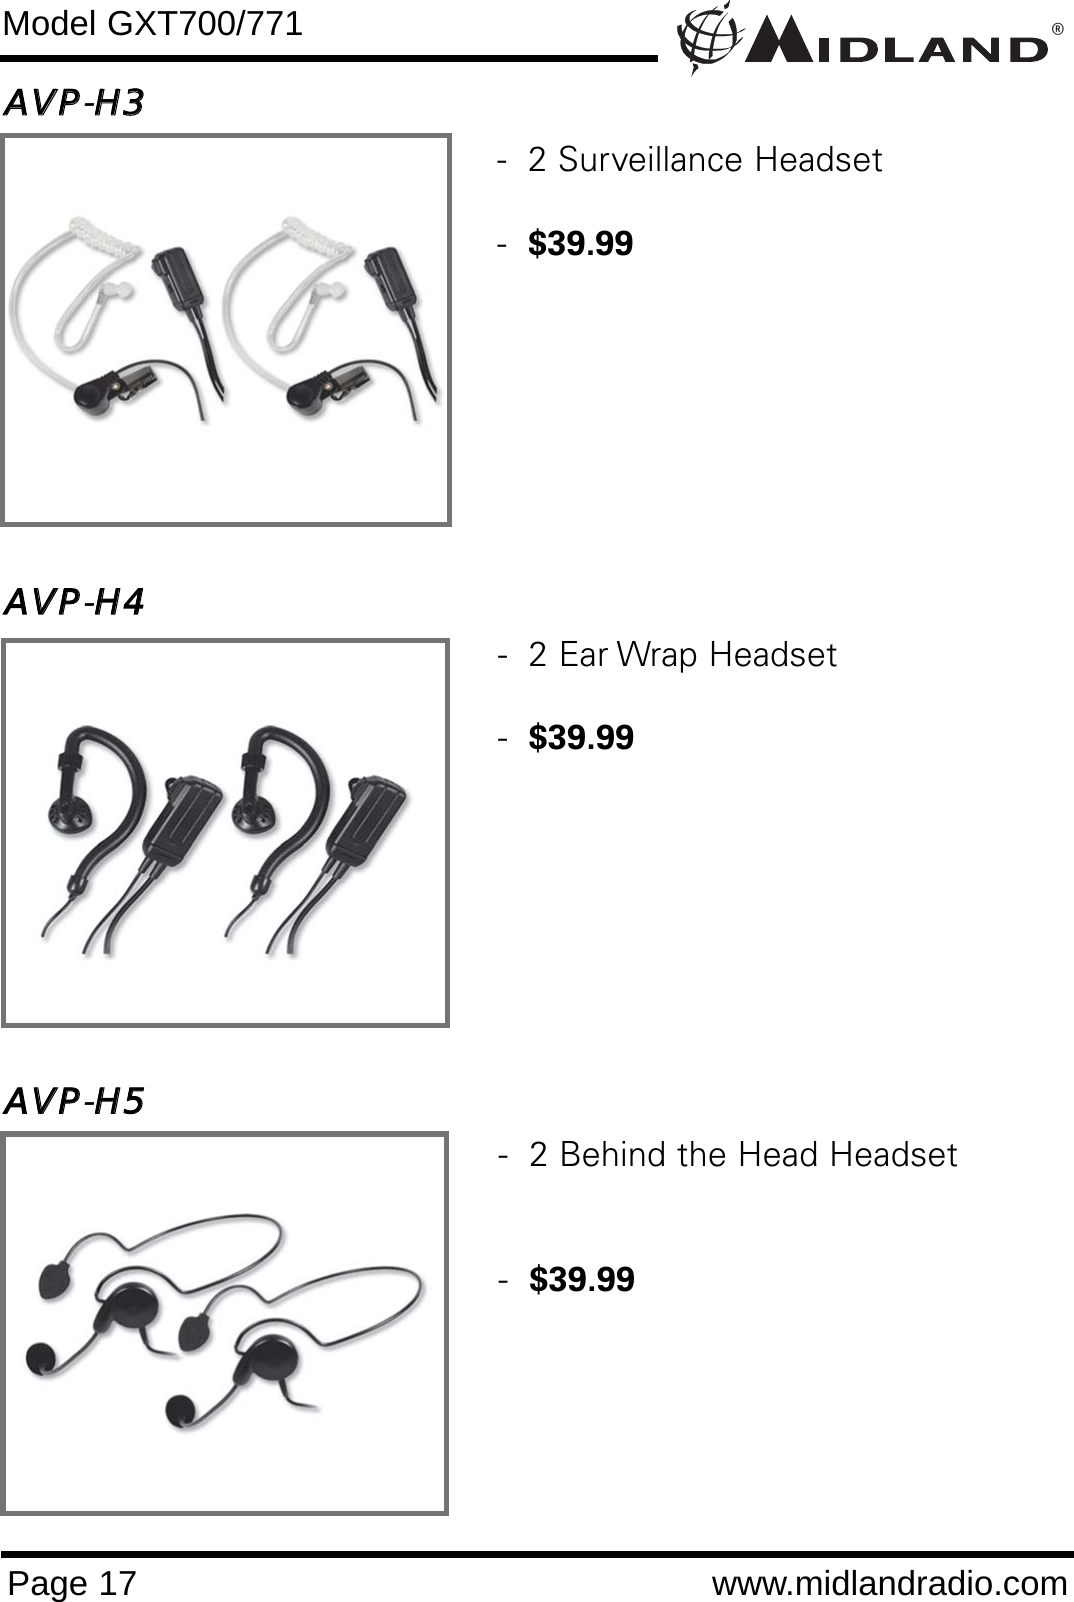 ®Page 17 www.midlandradio.comModel GXT700/771AAVVPP-HH33AAVVPP-HH44AAVVPP-HH55-  2 Behind the Head Headset -  $39.99-  2 Ear Wrap Headset-  $39.99-  2 Surveillance Headset-  $39.99